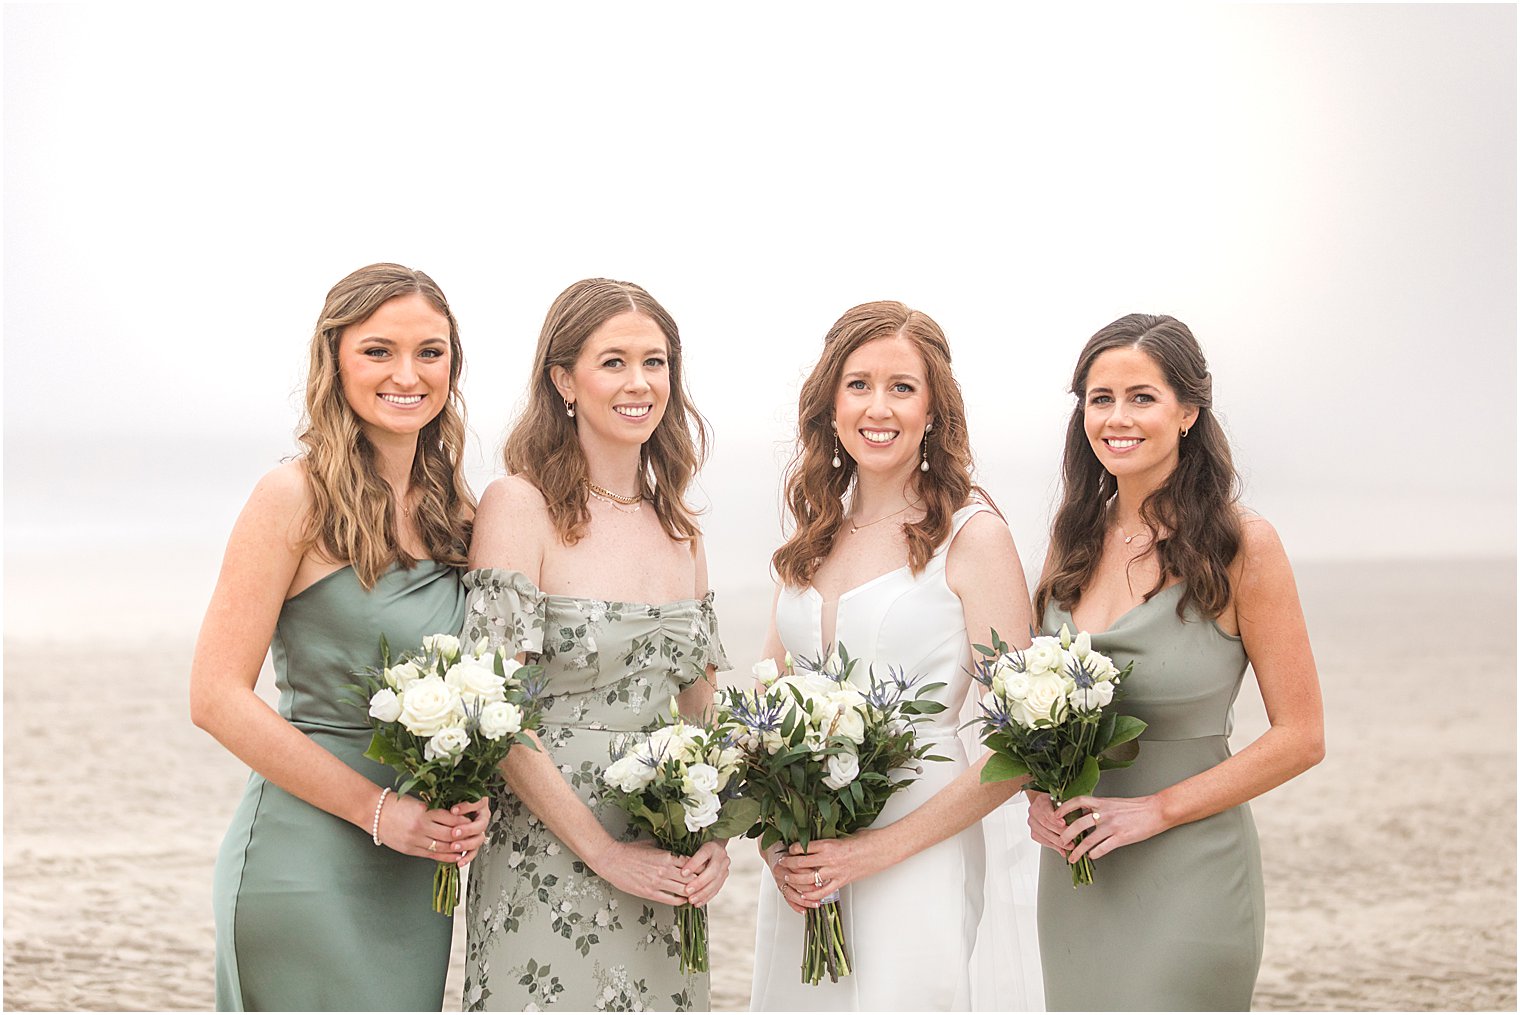 bride and bridesmaids in mismatched green gowns stand on beach